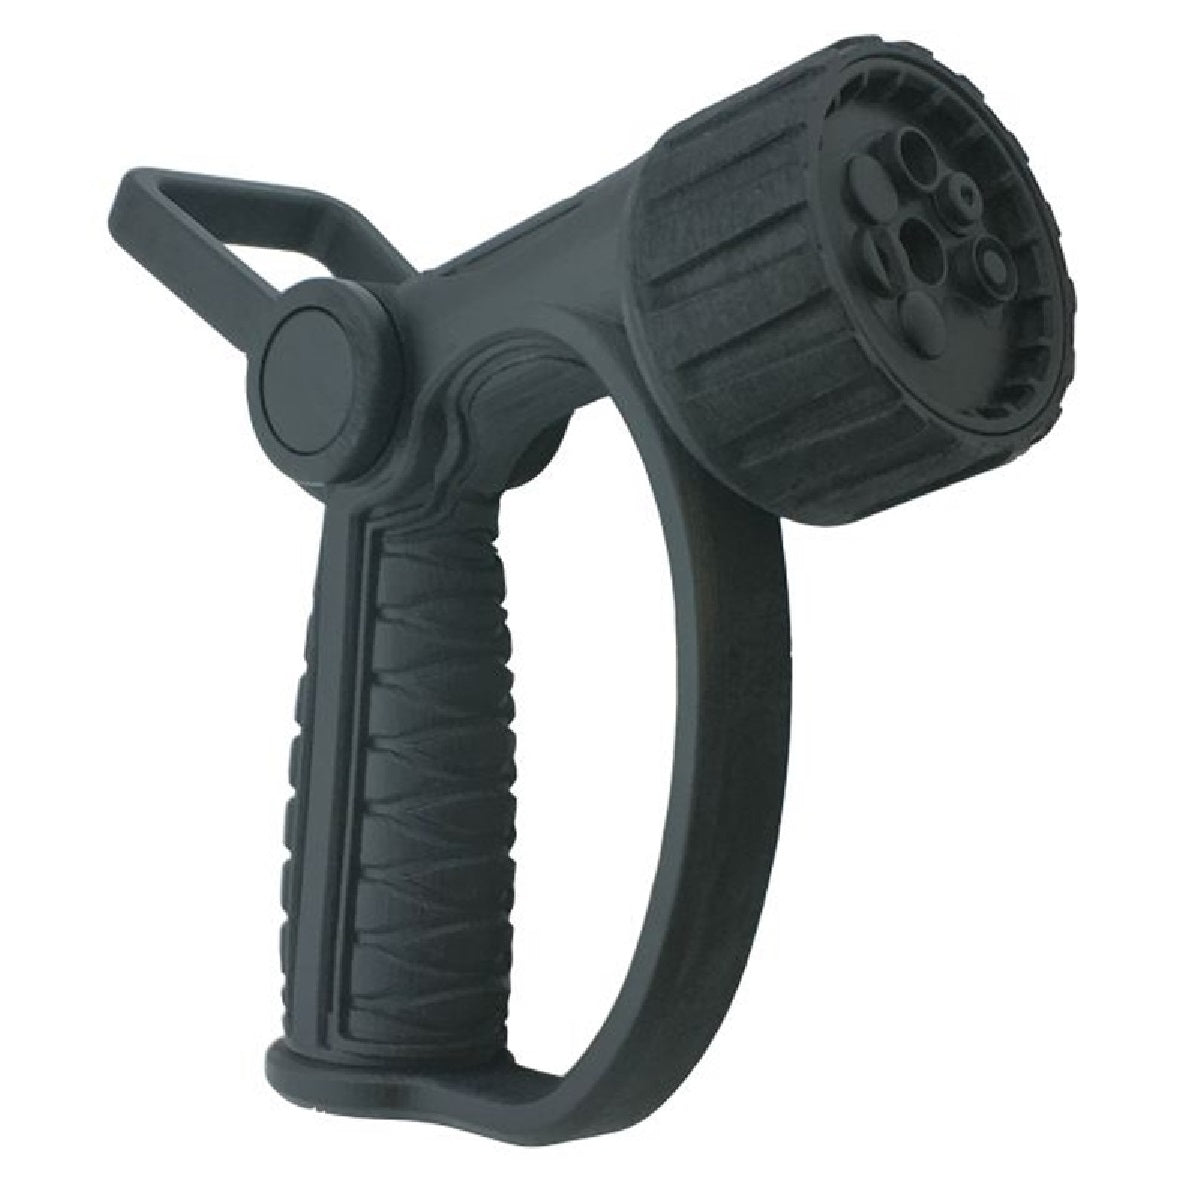 buy watering nozzles at cheap rate in bulk. wholesale & retail lawn care products store.